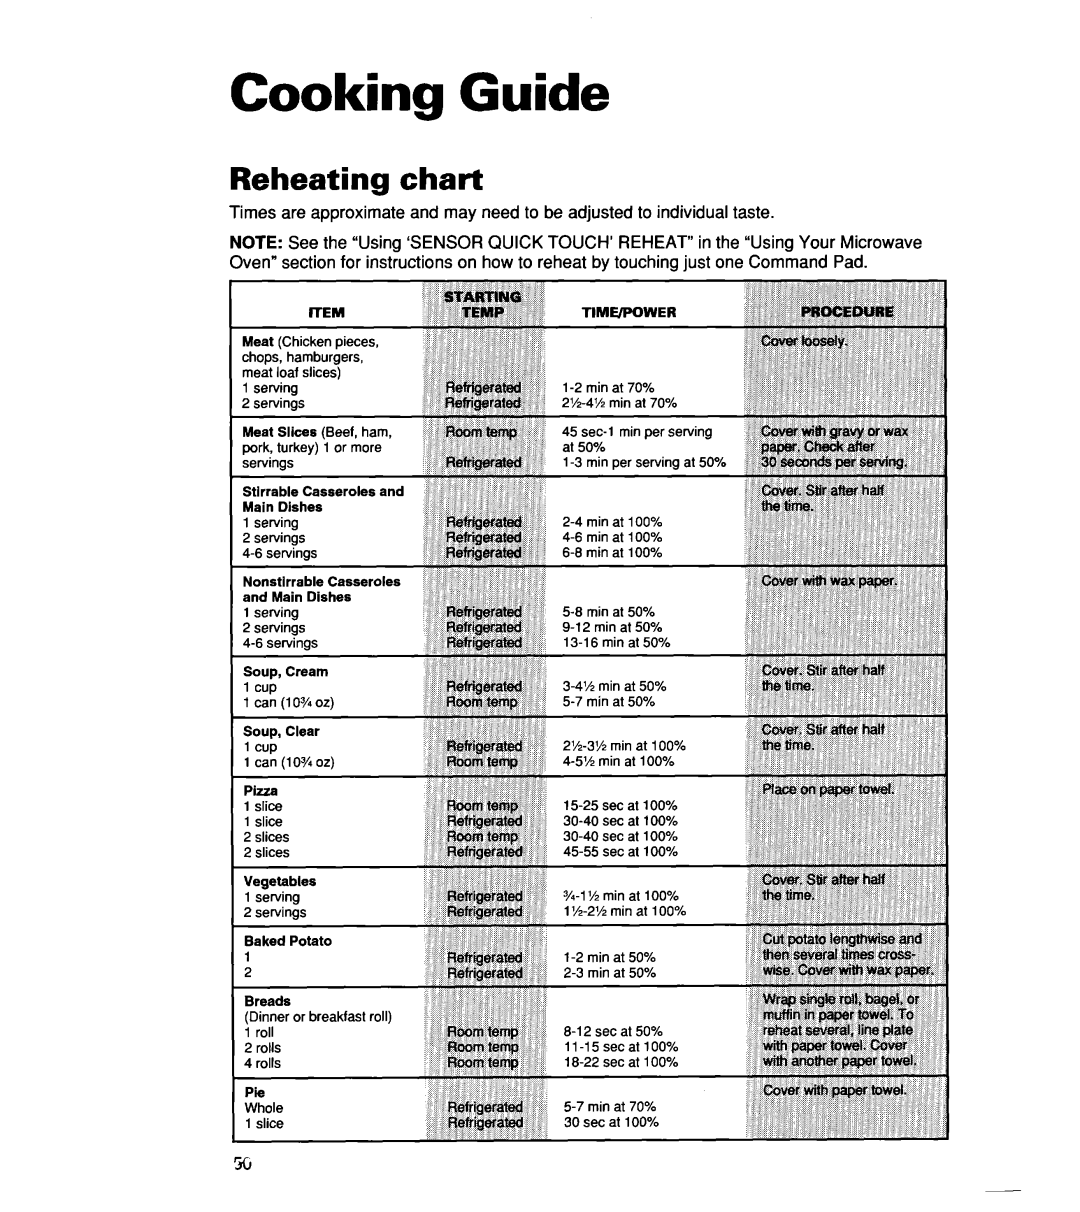 Whirlpool MH7135XE warranty Cooking Guide, Reheating chart 